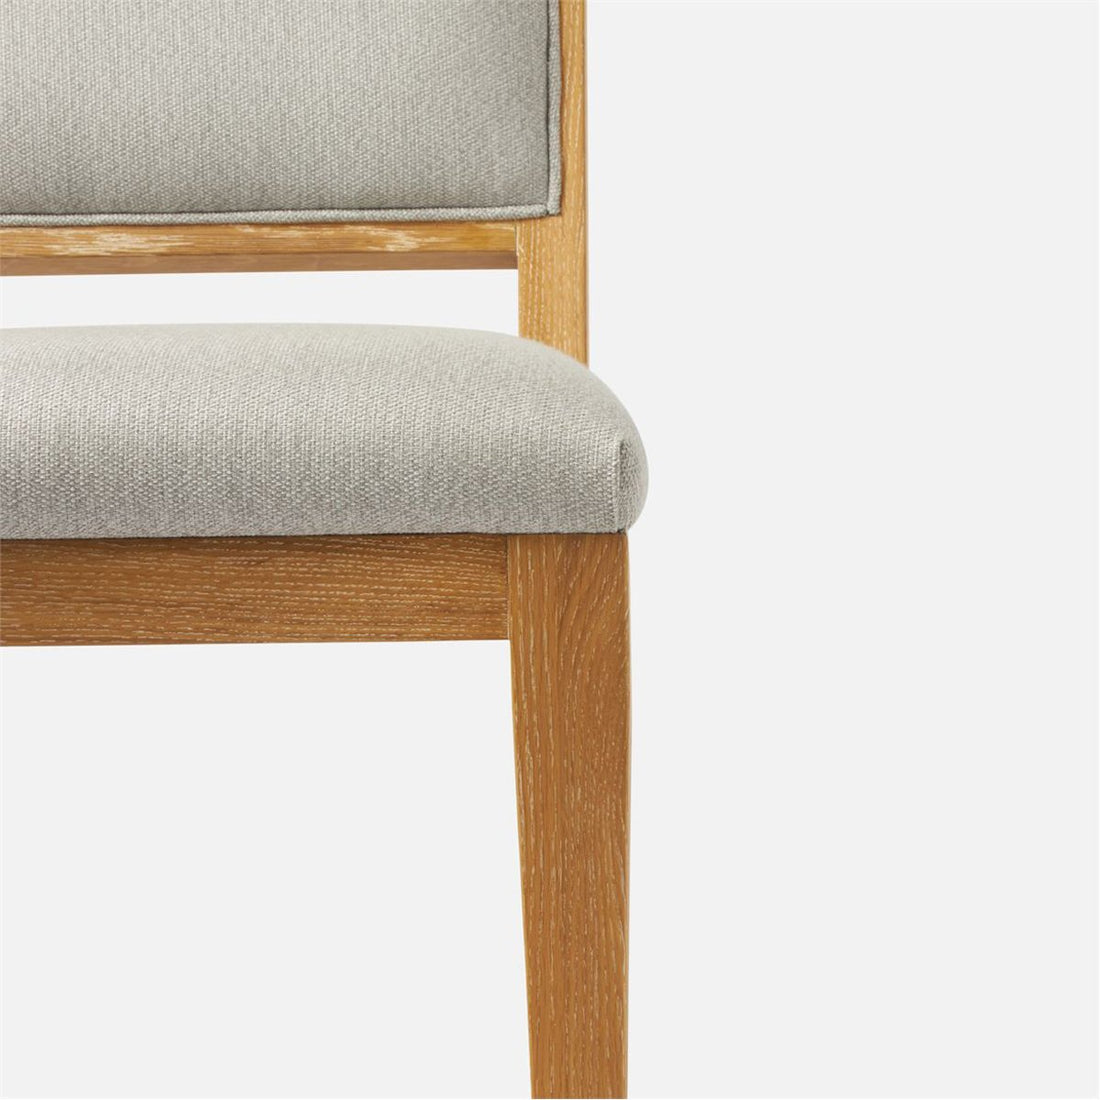 Made Goods Salem Upholstered Dining Chair in Kern Fabric